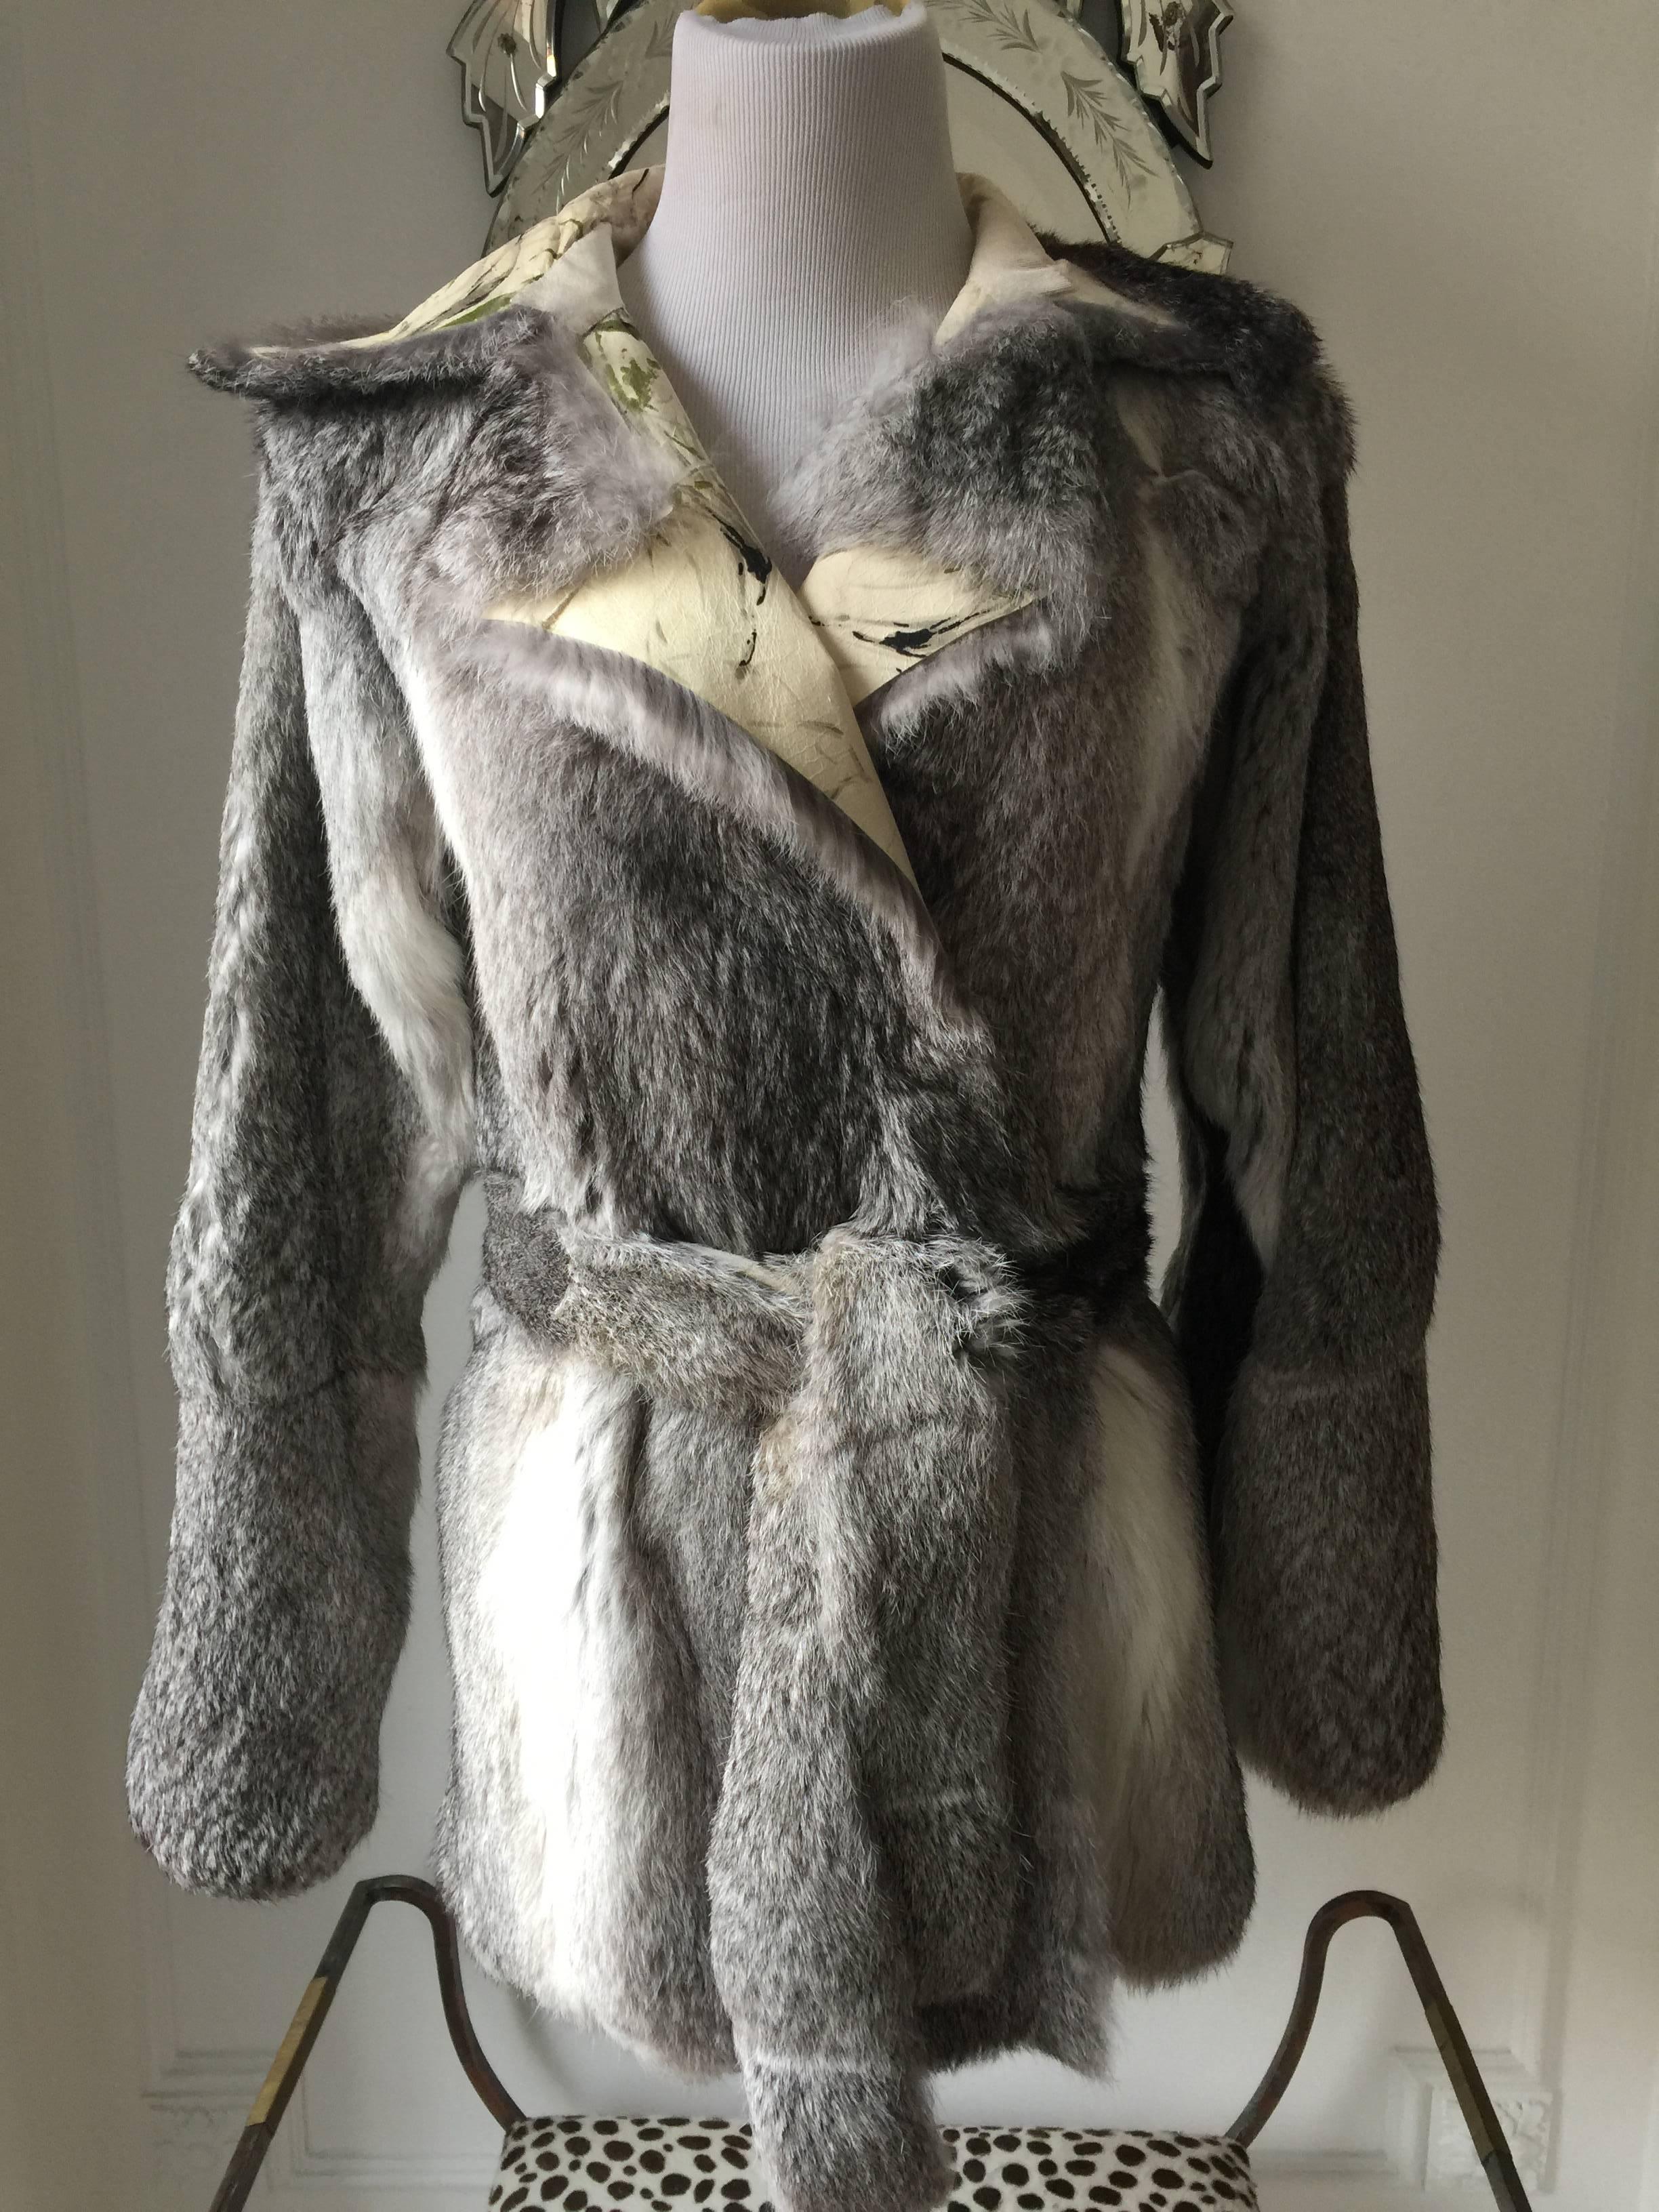 This jacket is a rare find....
Totally reversible i chose to present to you the leather side....
the fur used is beautiful rabbit fur in graduated greys...very luxurious and soft to the touch...
however the handpainted leather in the inside of